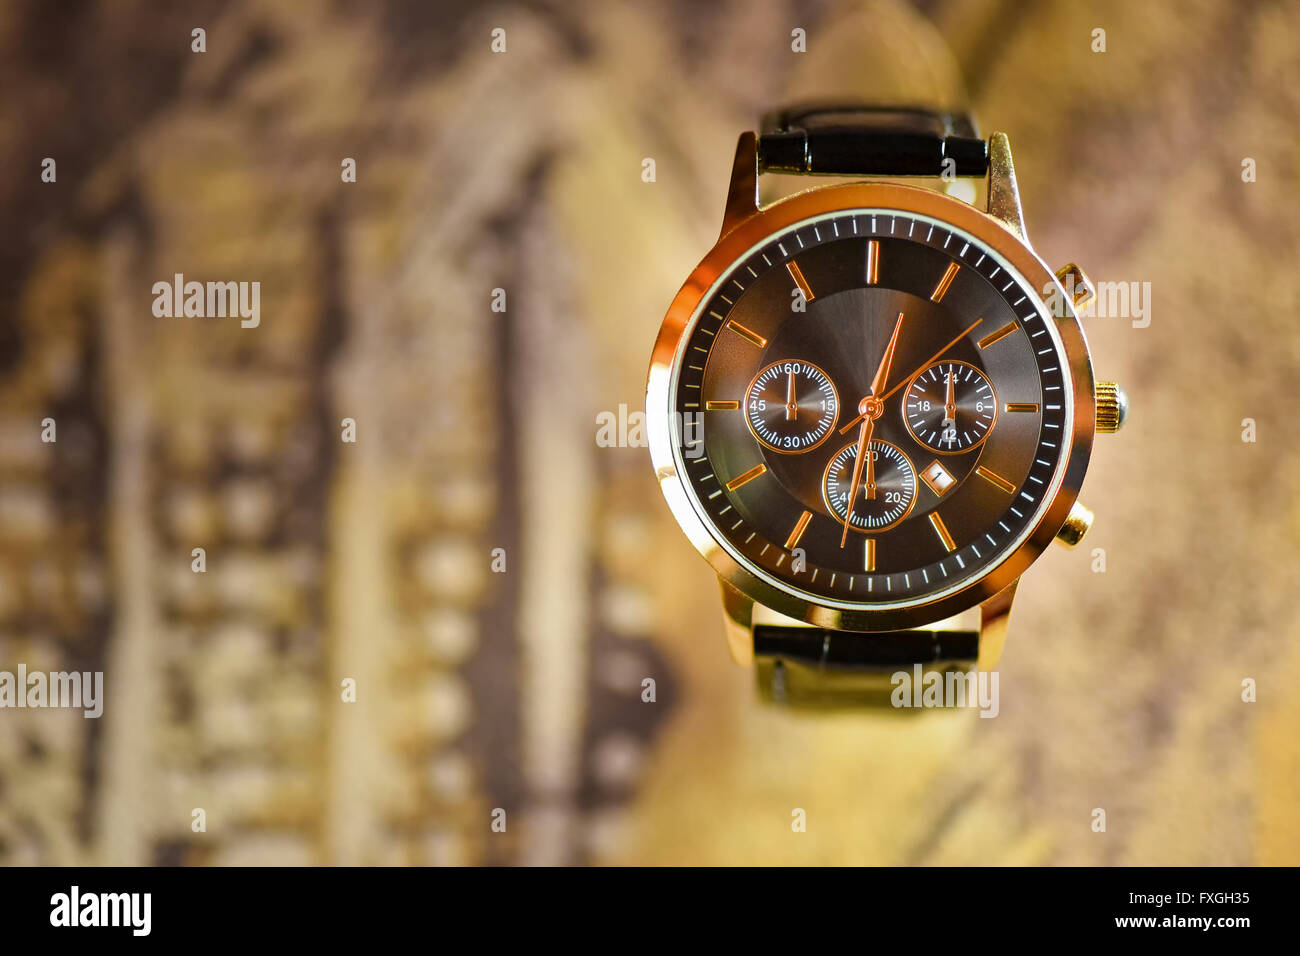 Luxury watch with blurry background in available light Stock Photo